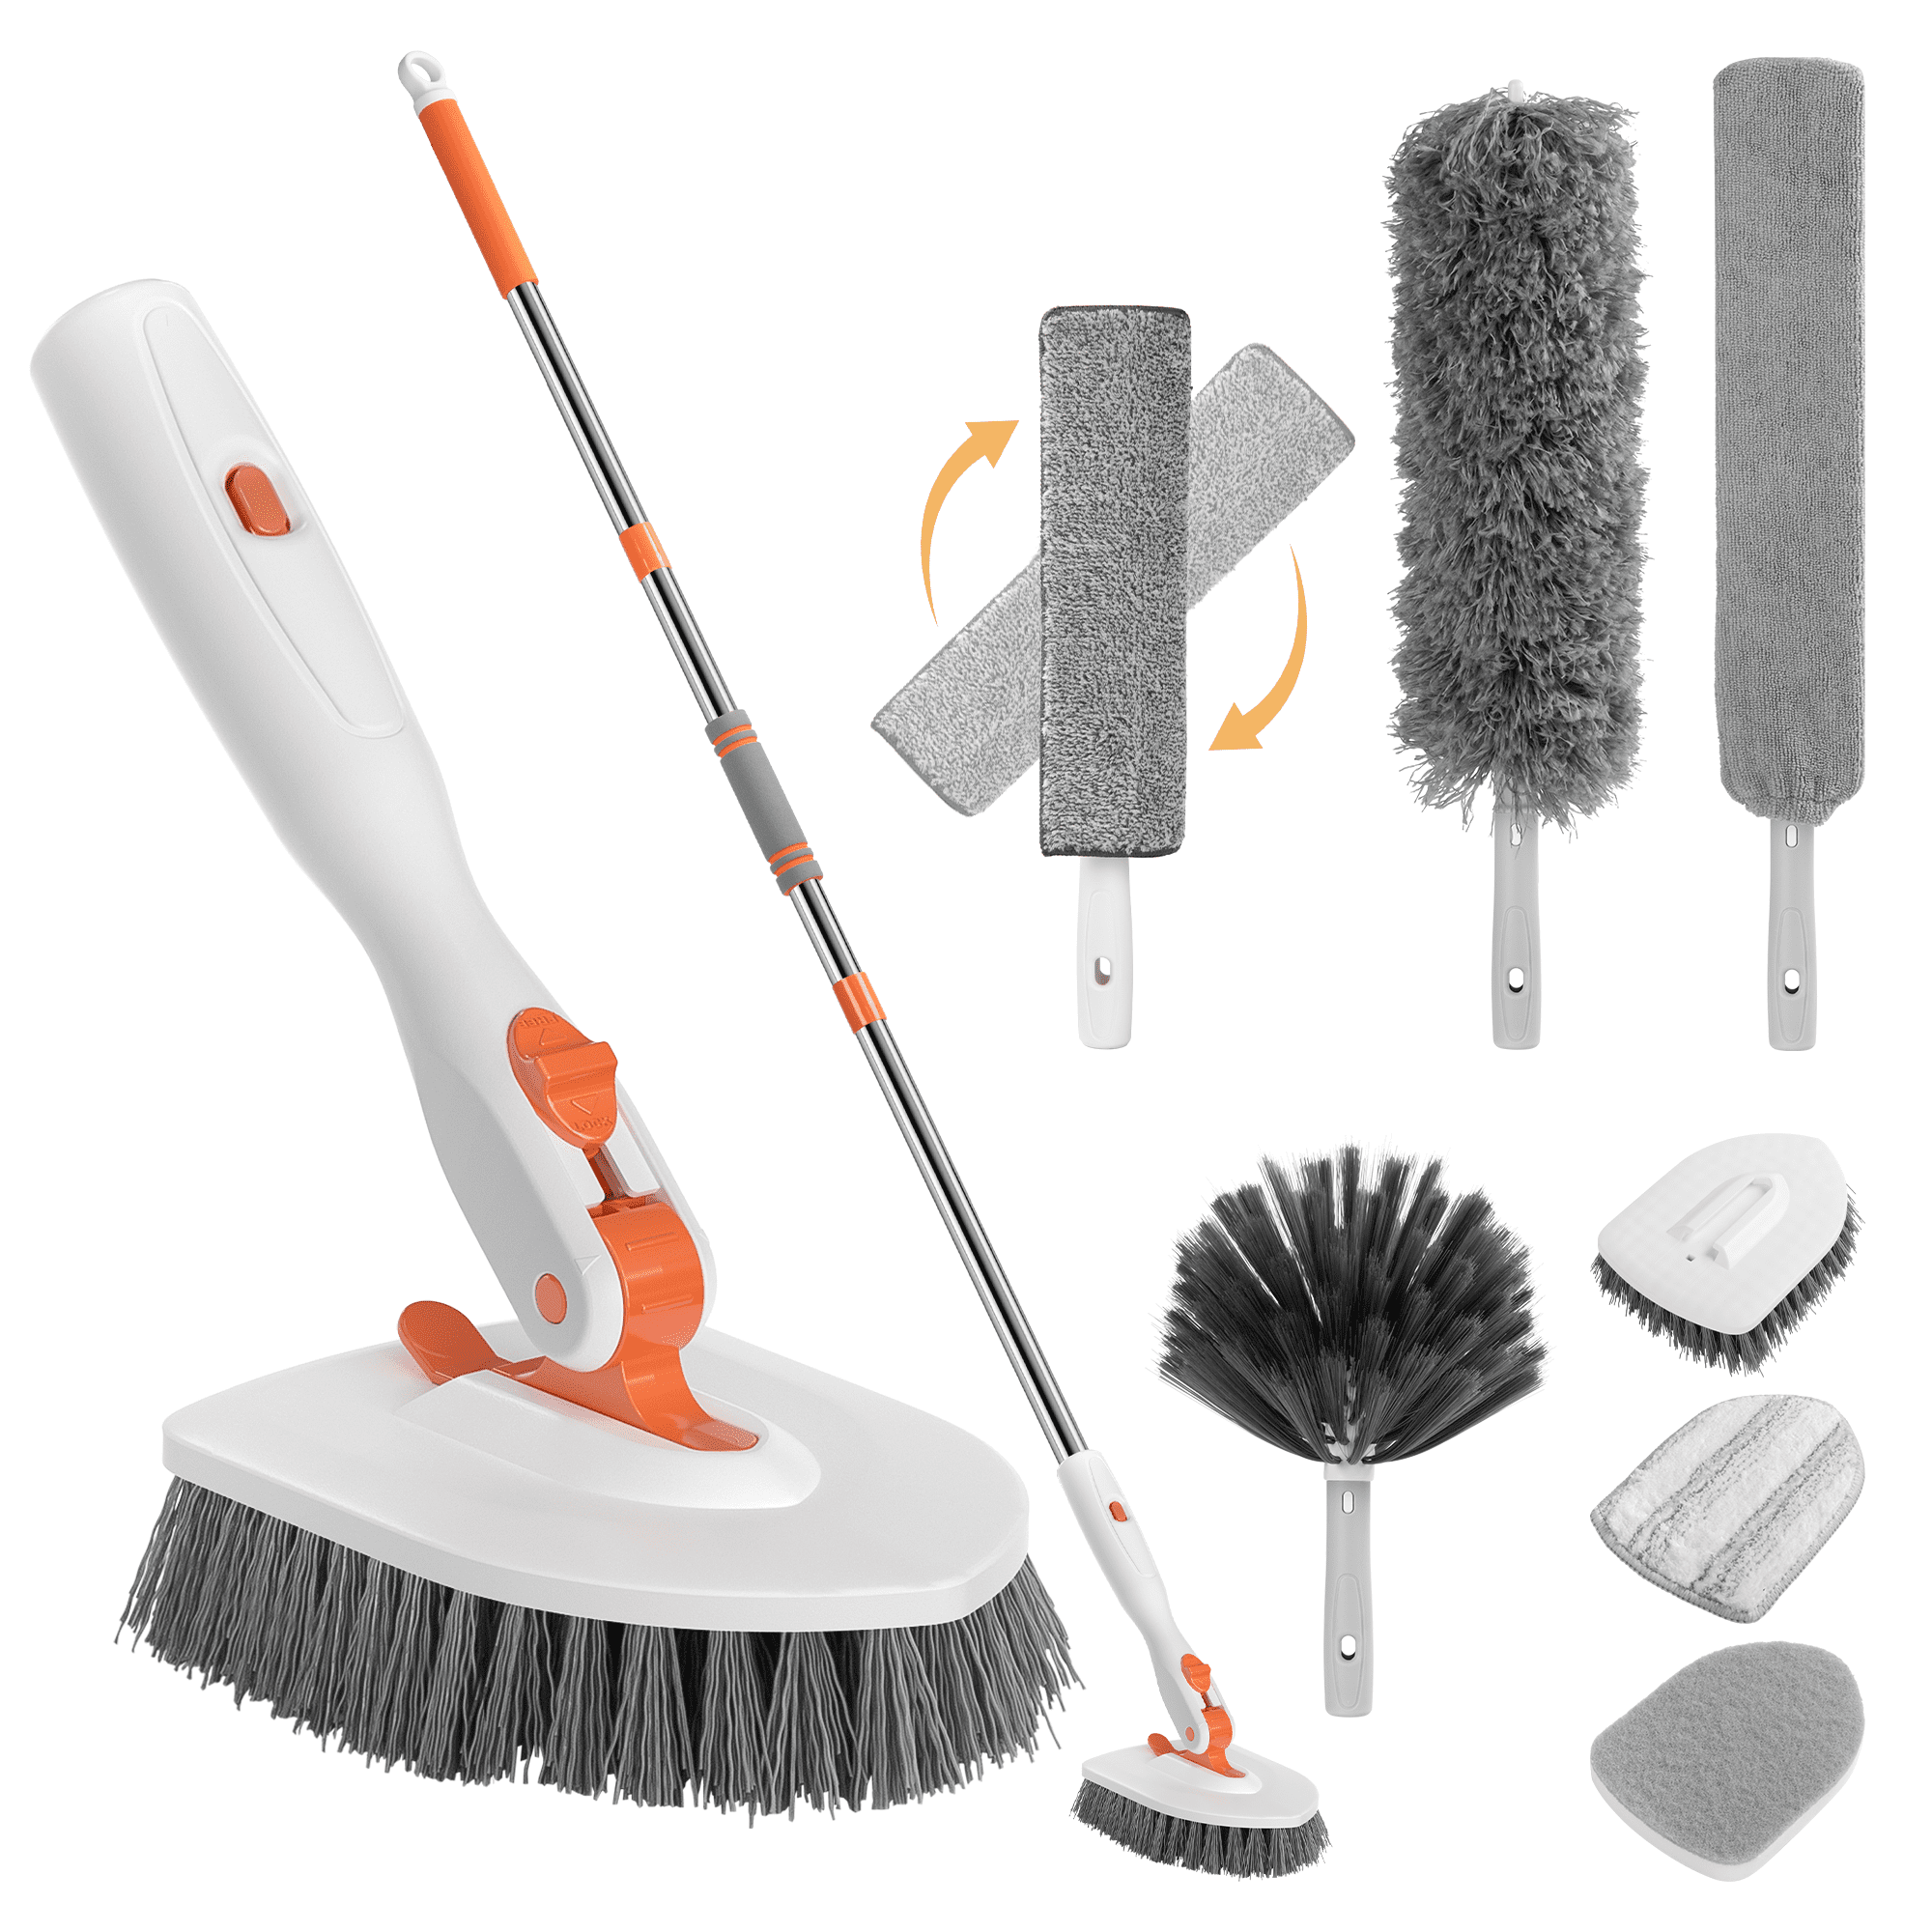 Shower Head Cleaning Brushes, Effortlessly Maintain a Clean Clog-Free  Shower with Our Versatile Shower Cleaning Brush Tiny Cleaning Brush for  Cleaning